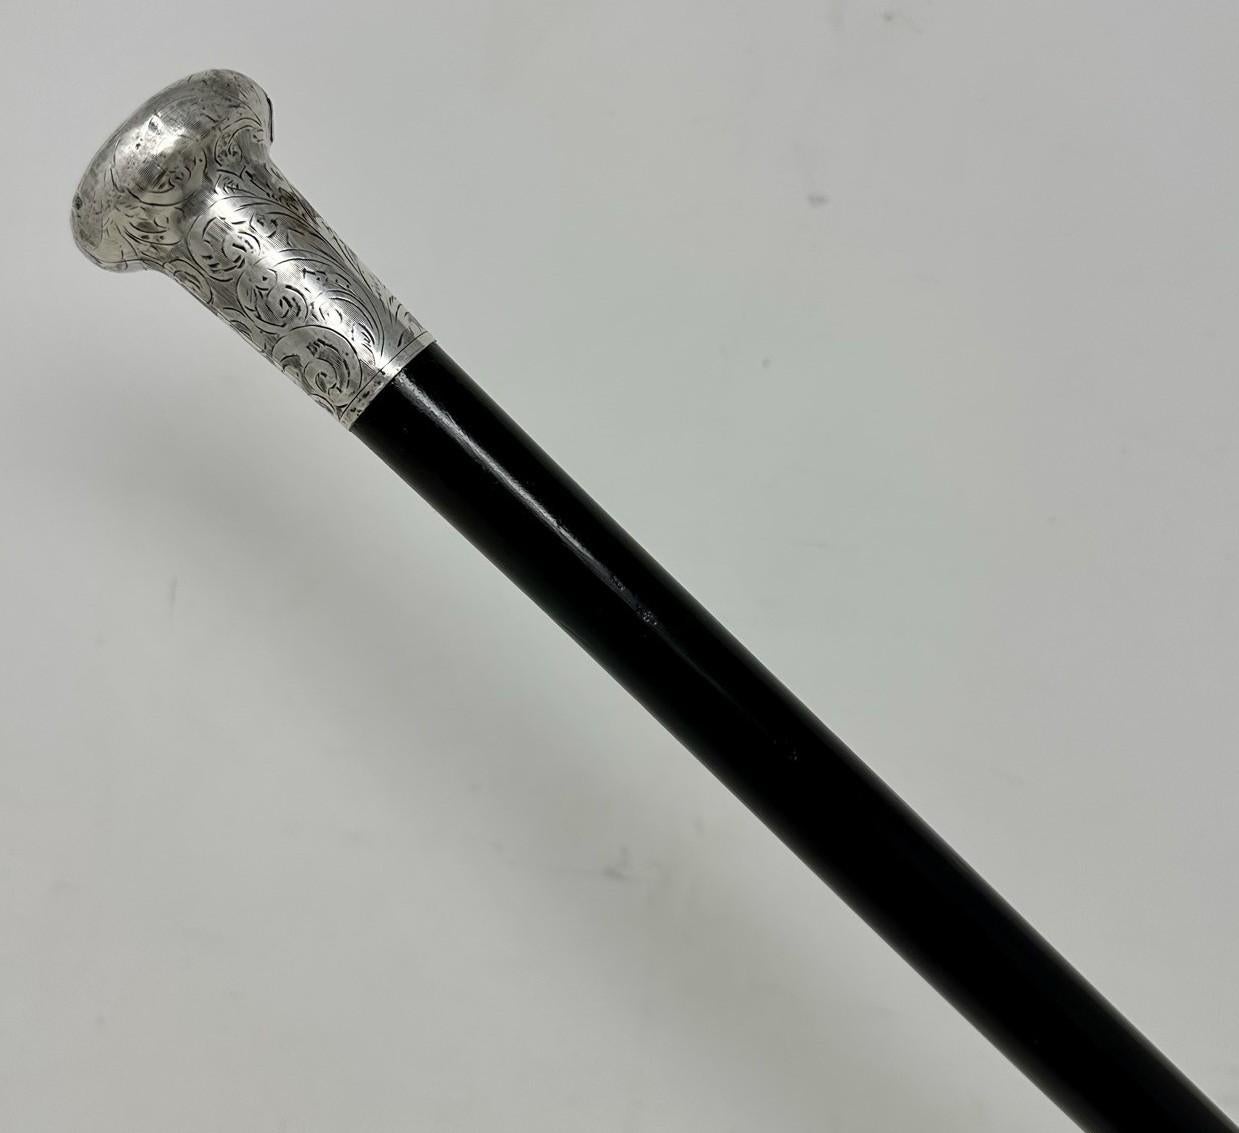 Fine Quality French Polished Heavy Gauge Ebony Walking Cane Stick with Highly Decorative Embossed Silver Grip, made by renowned English Stick Maker Jonathan Howell.  
The circular silver knopped grip above a tapering turned Ebony shaft complete with